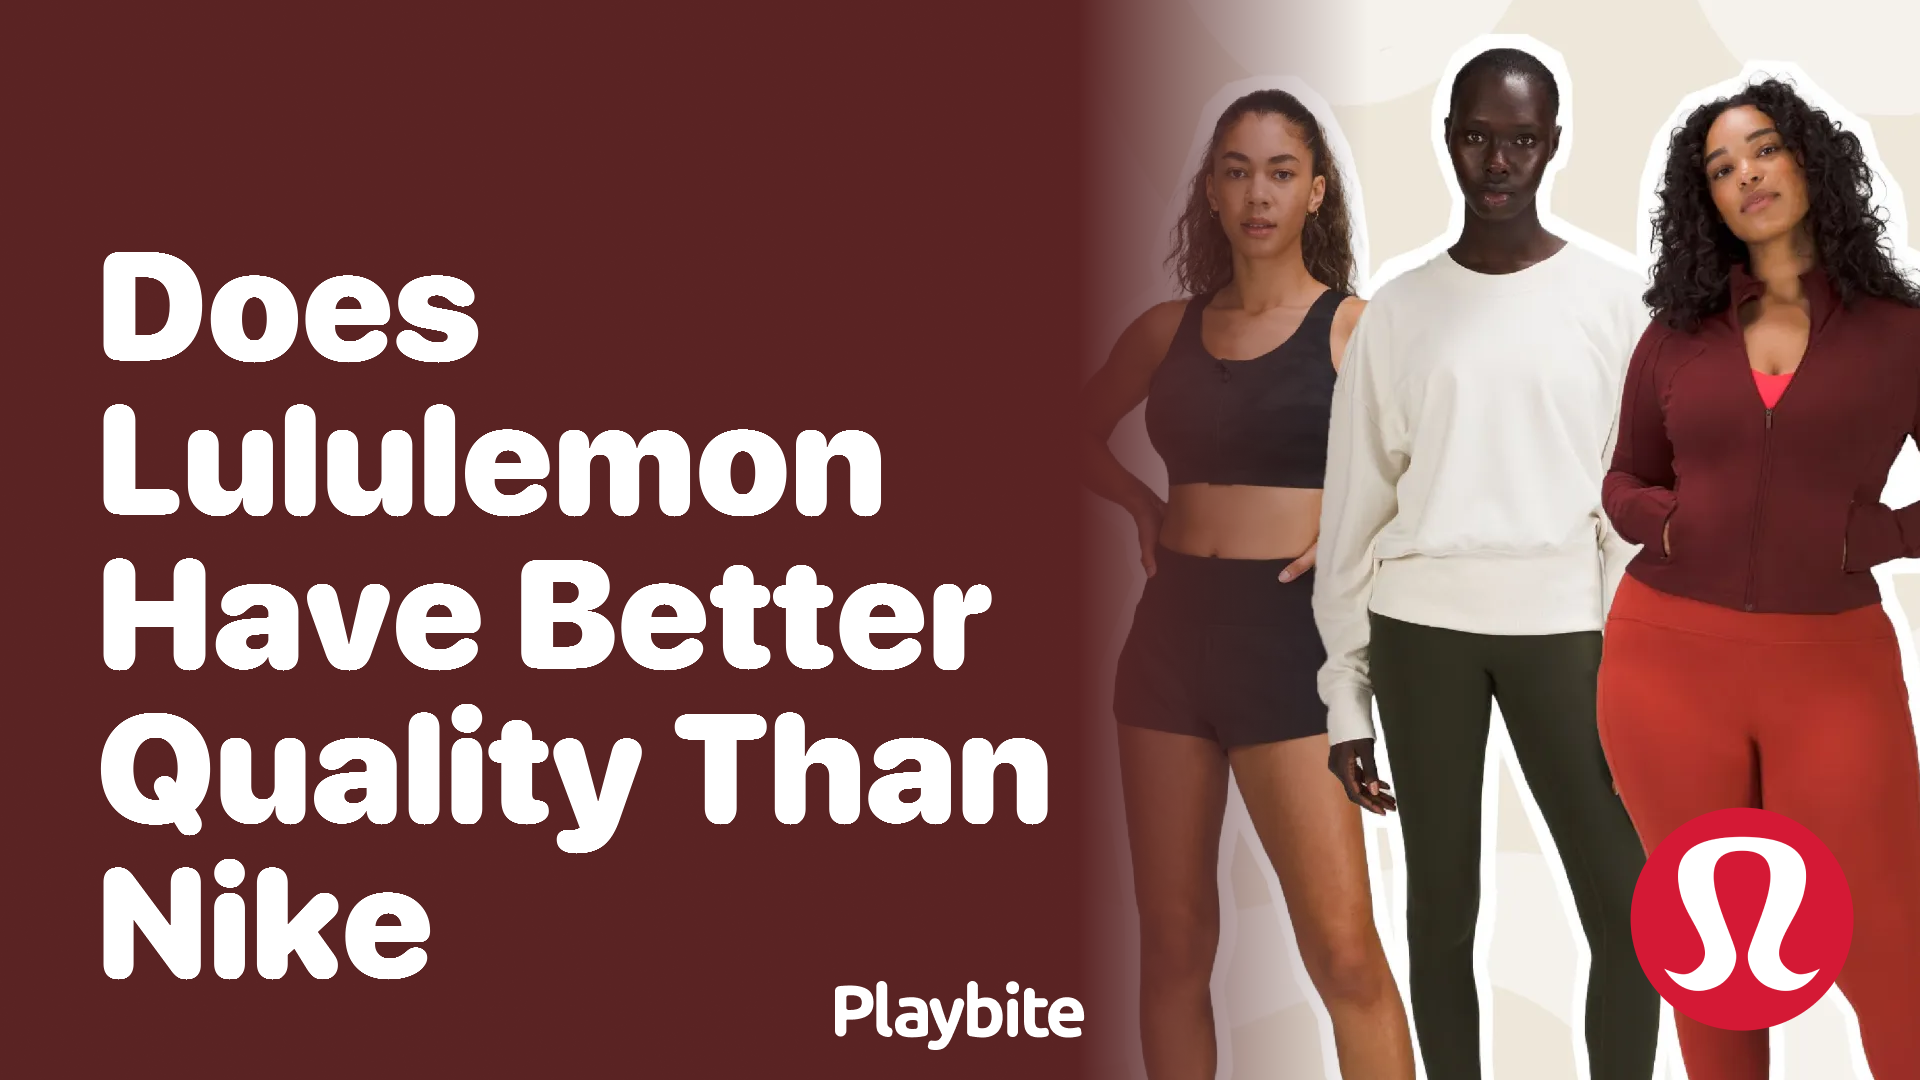 Does Lululemon Have Better Quality Than Nike? - Playbite